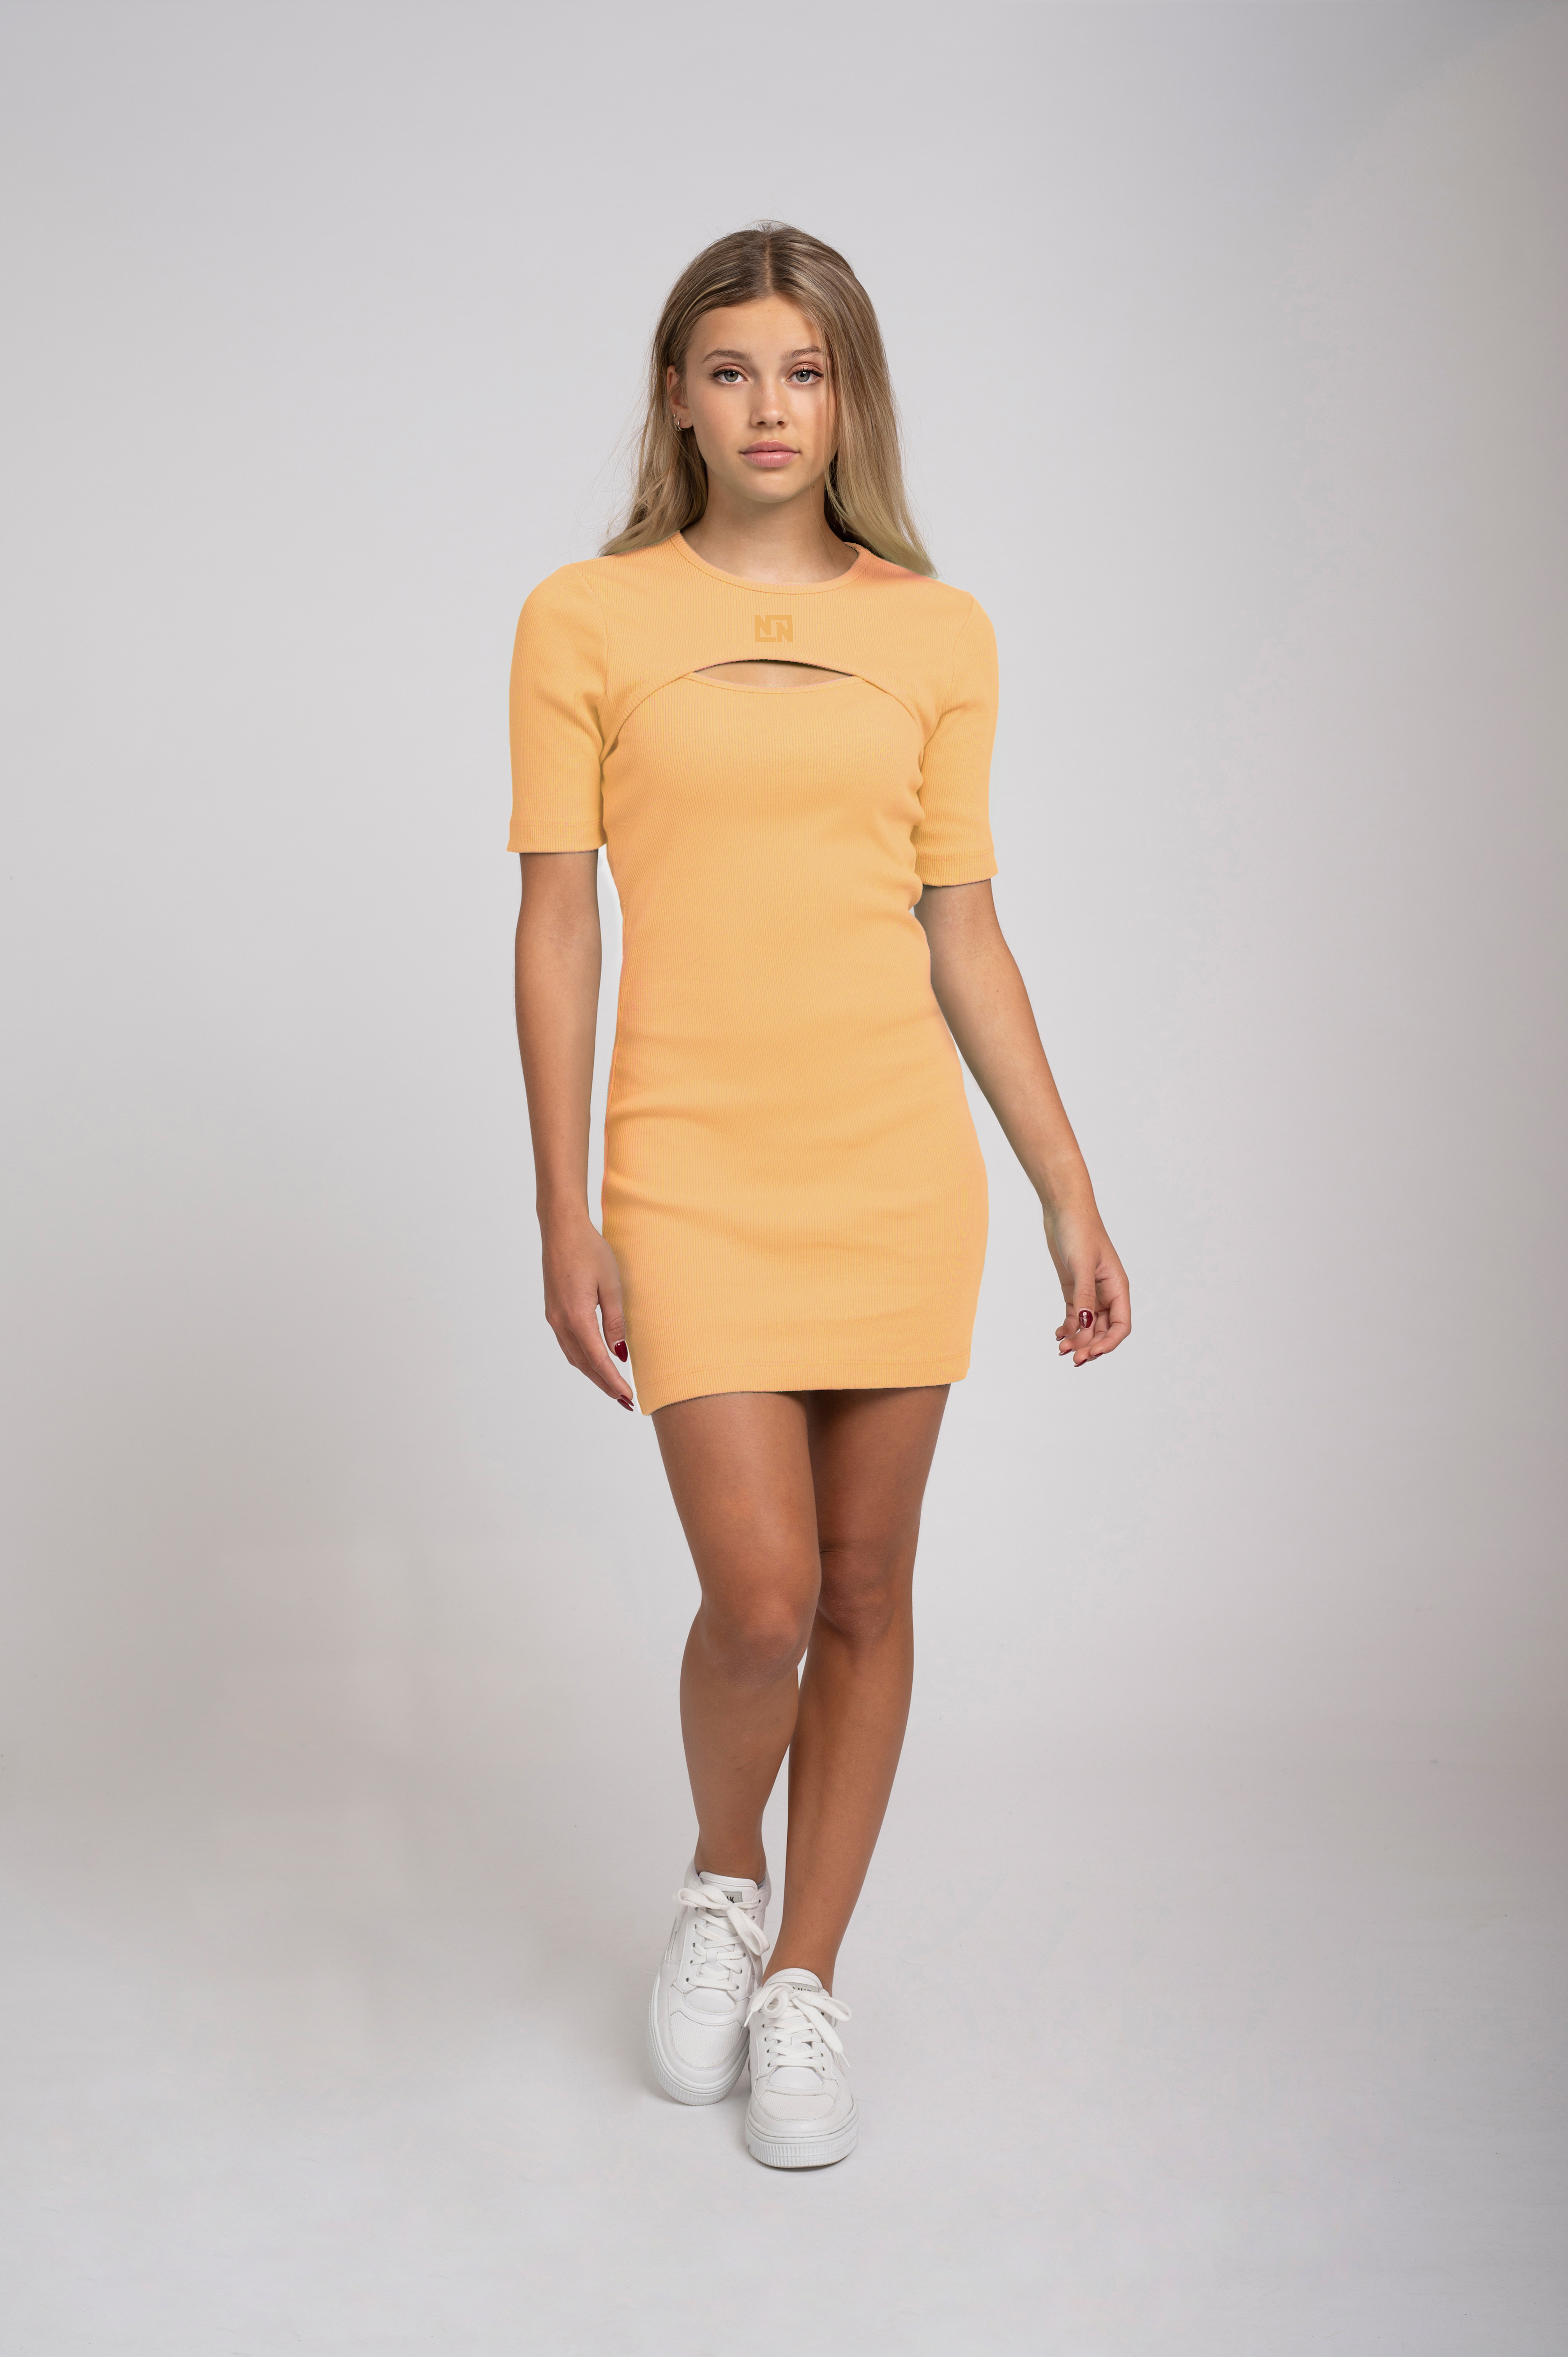 fitted sweatdress with cutout